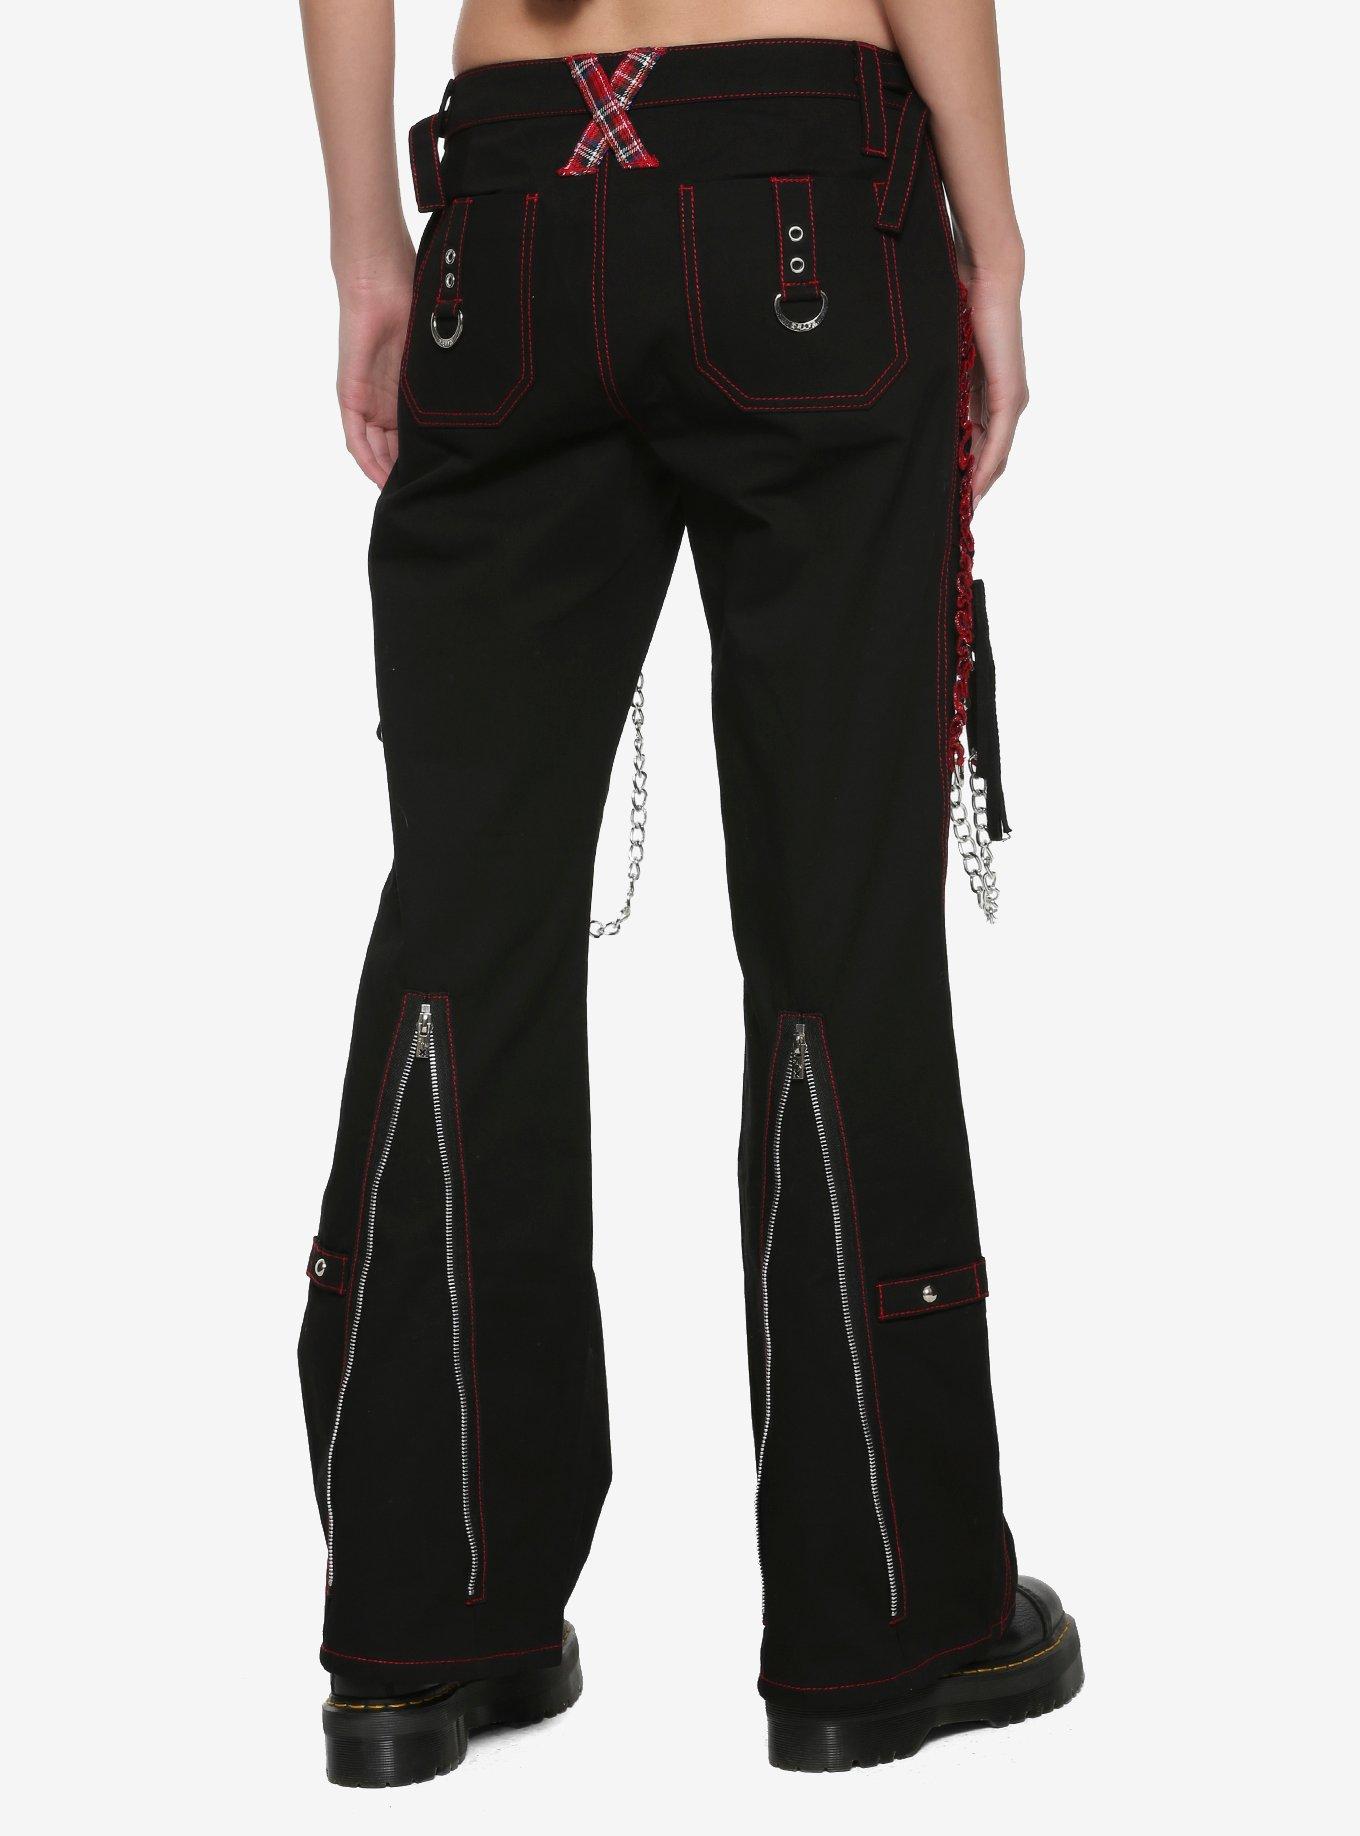 Forget Jncos. Hot-Topic Tripp chain pants were for the really cool kids :  r/Millennials